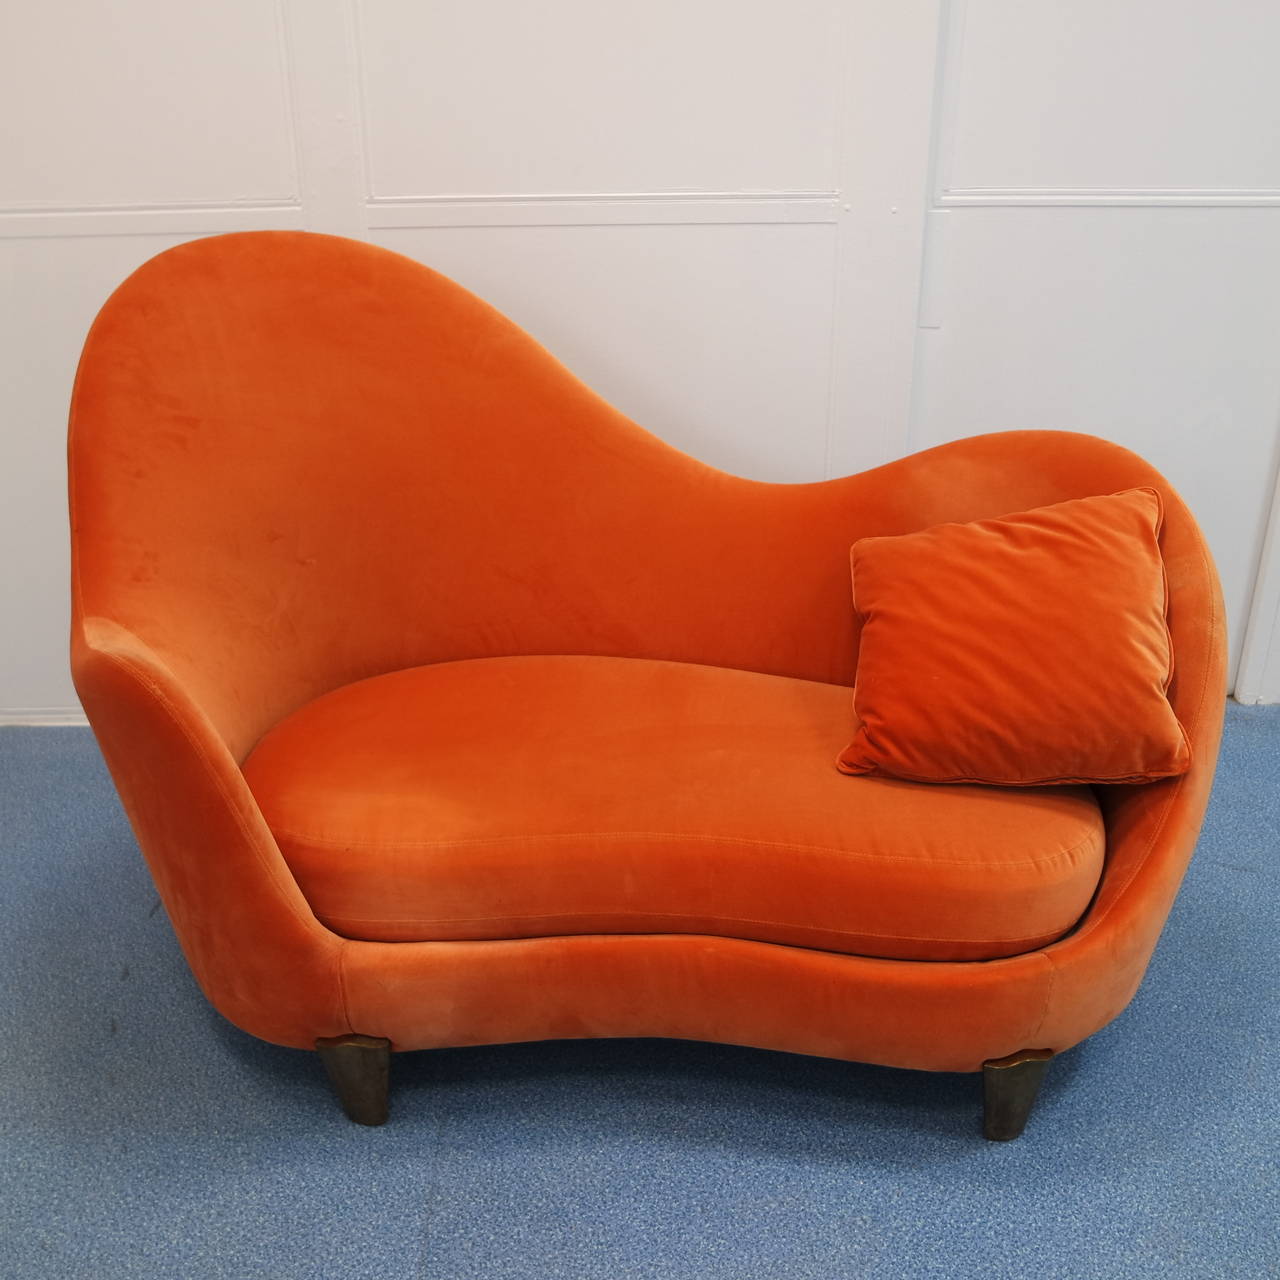 Famous sofa by Garouste & Bonetti with a wavy back and bronze feet covered with an orange velvet fabric.